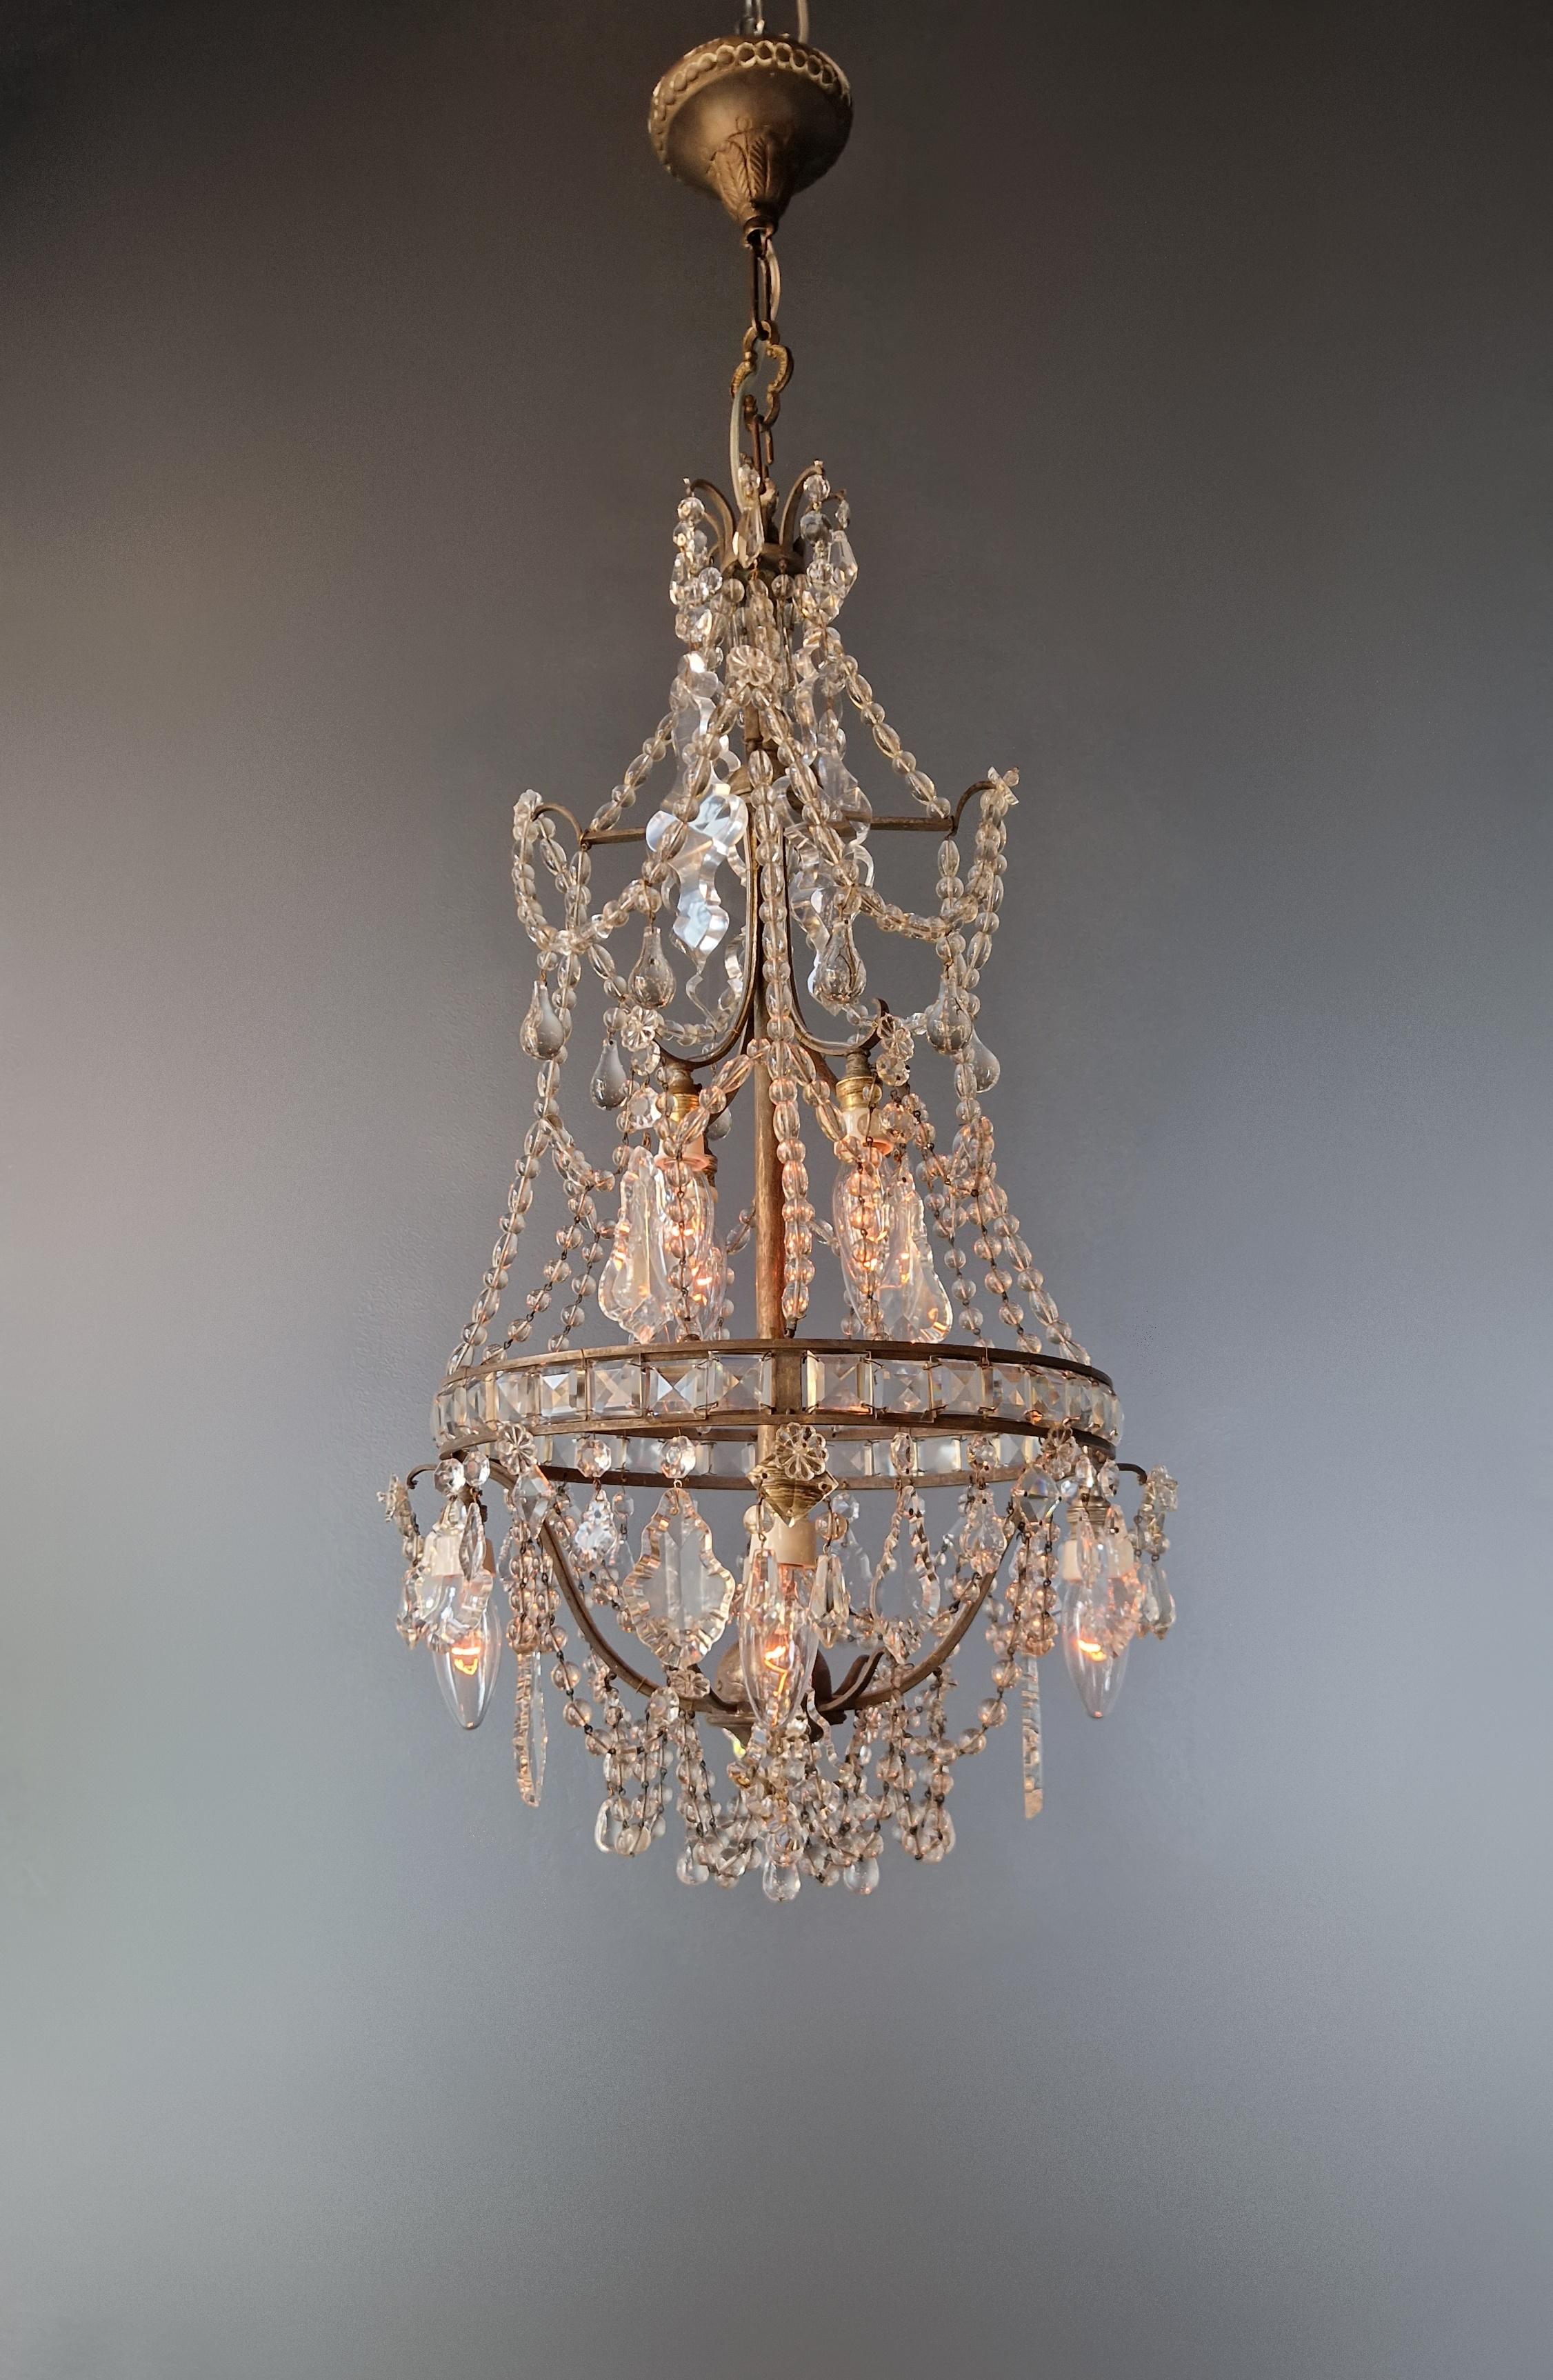 Elegant Antique Chandelier: A Testament to Craftsmanship and Grace

Behold the splendor of the past revitalized in our meticulously restored old chandelier, a true masterpiece that encapsulates the zenith of Art Nouveau design. With utmost care and